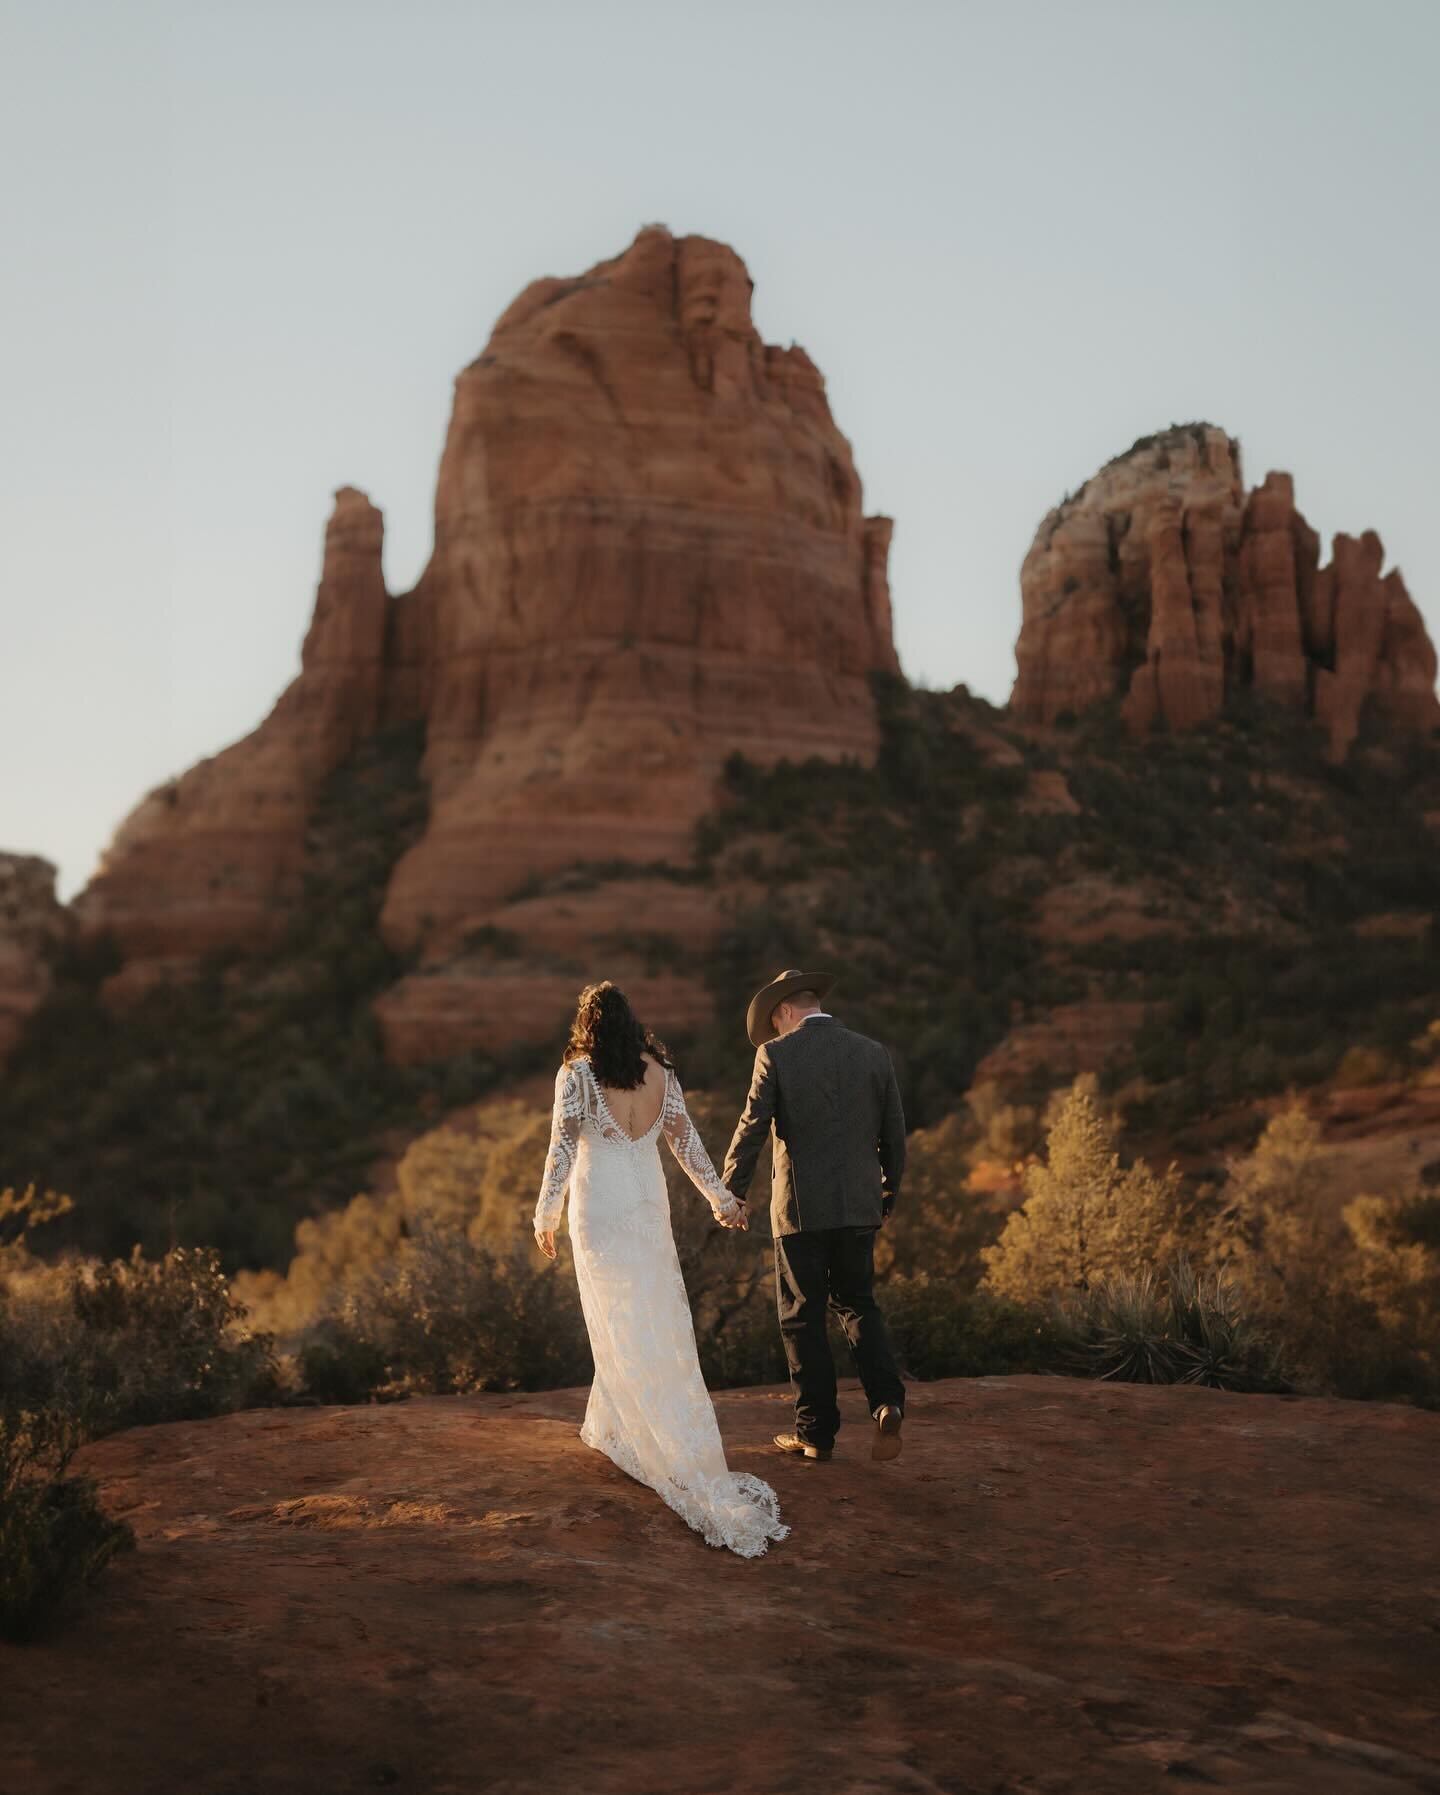 I cant get enough of wandering. Or the earth. Some of us carry an inherent need to explore. // Victoria Erickson

#elopement #couplegoals #chasinglight #nikoncreators #nikon #sunset #desert